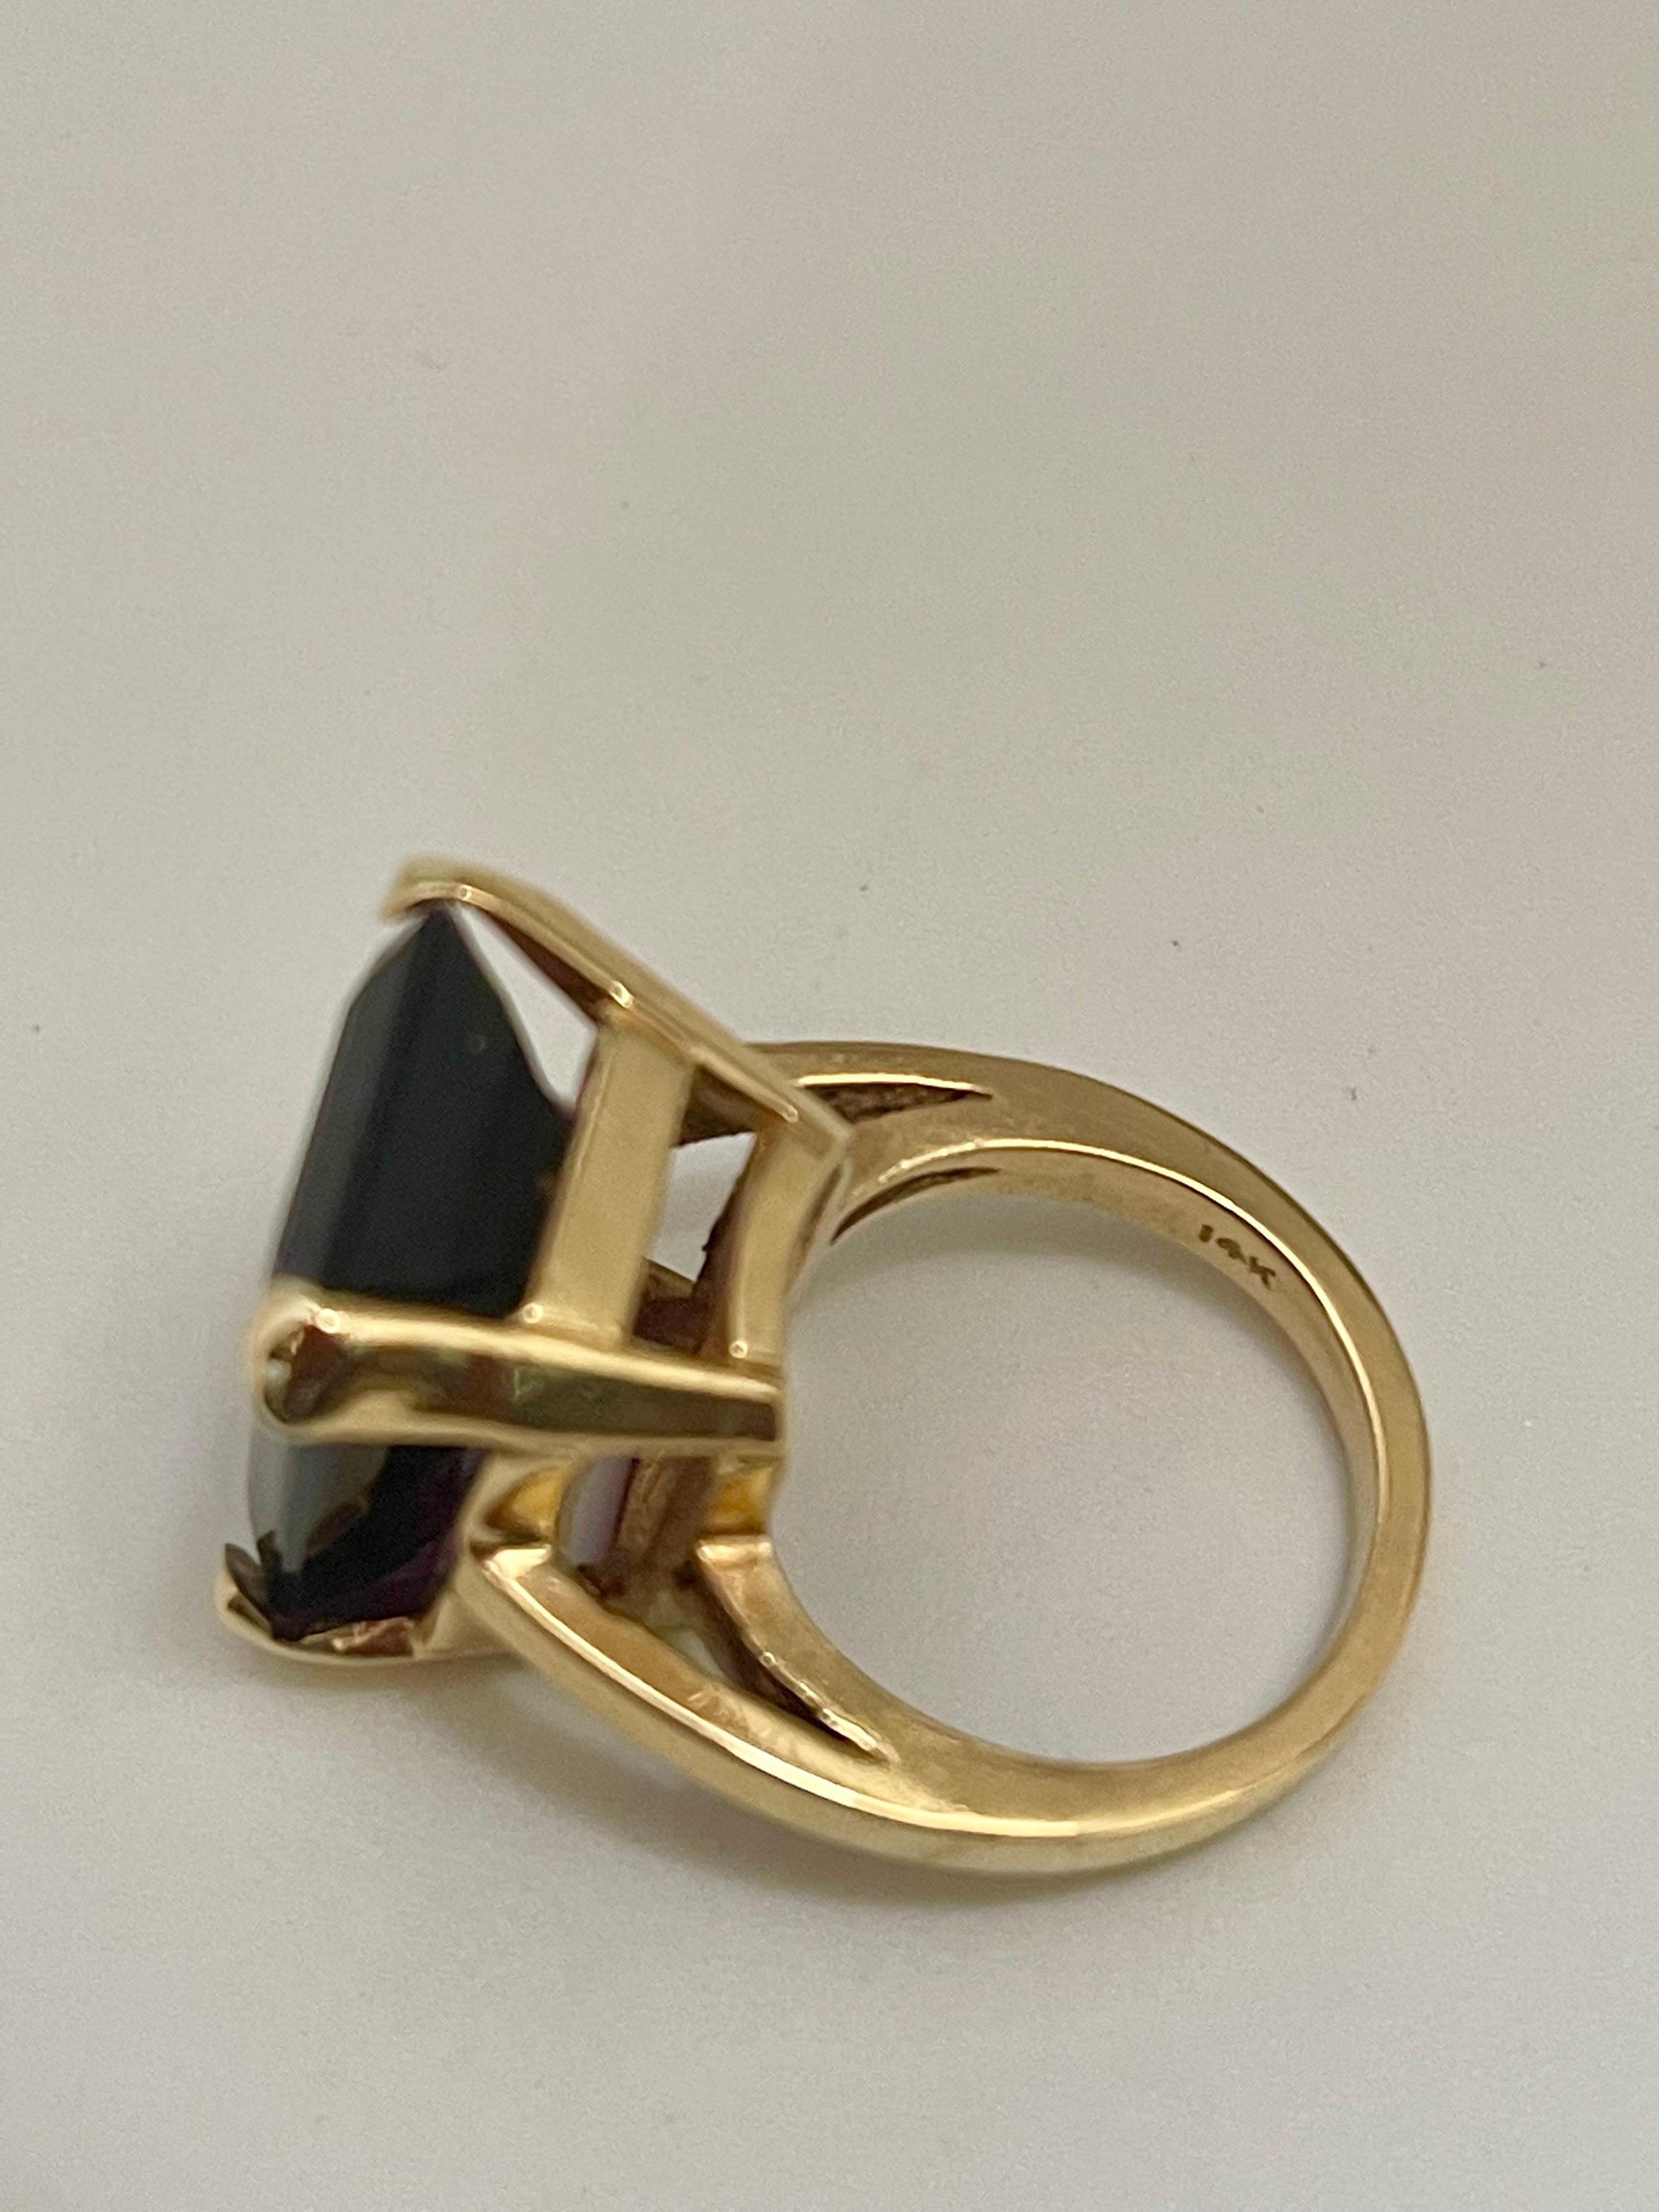 15 Carat Emerald Cut Amethyst Cocktail Ring in 14 Karat Yellow Gold For Sale 7